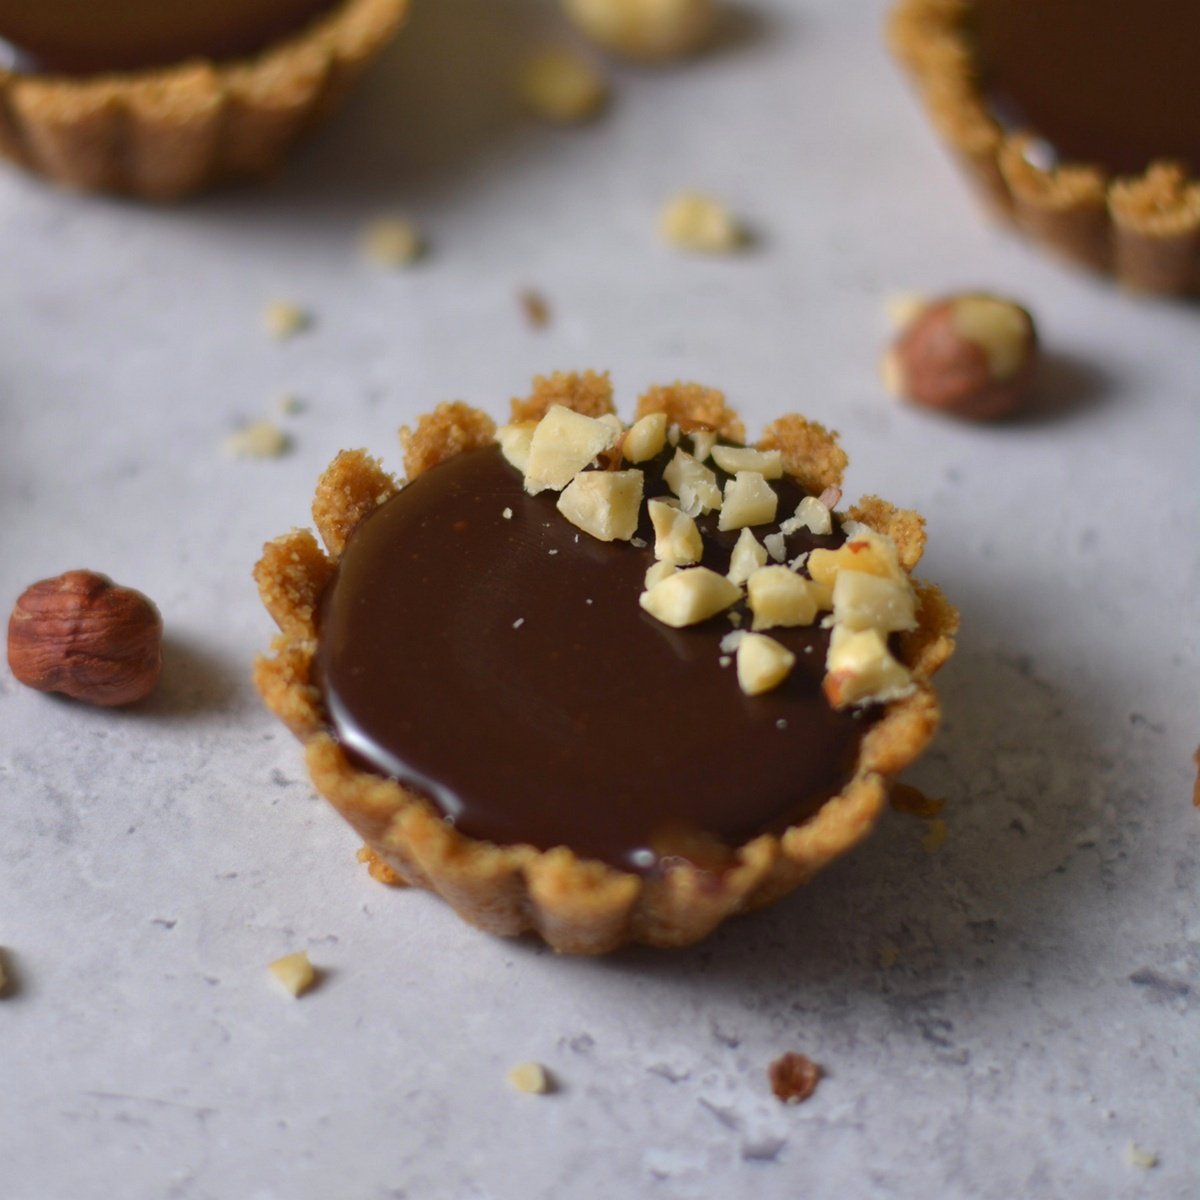 A nutella tartlet with chopped hazelnuts on top.